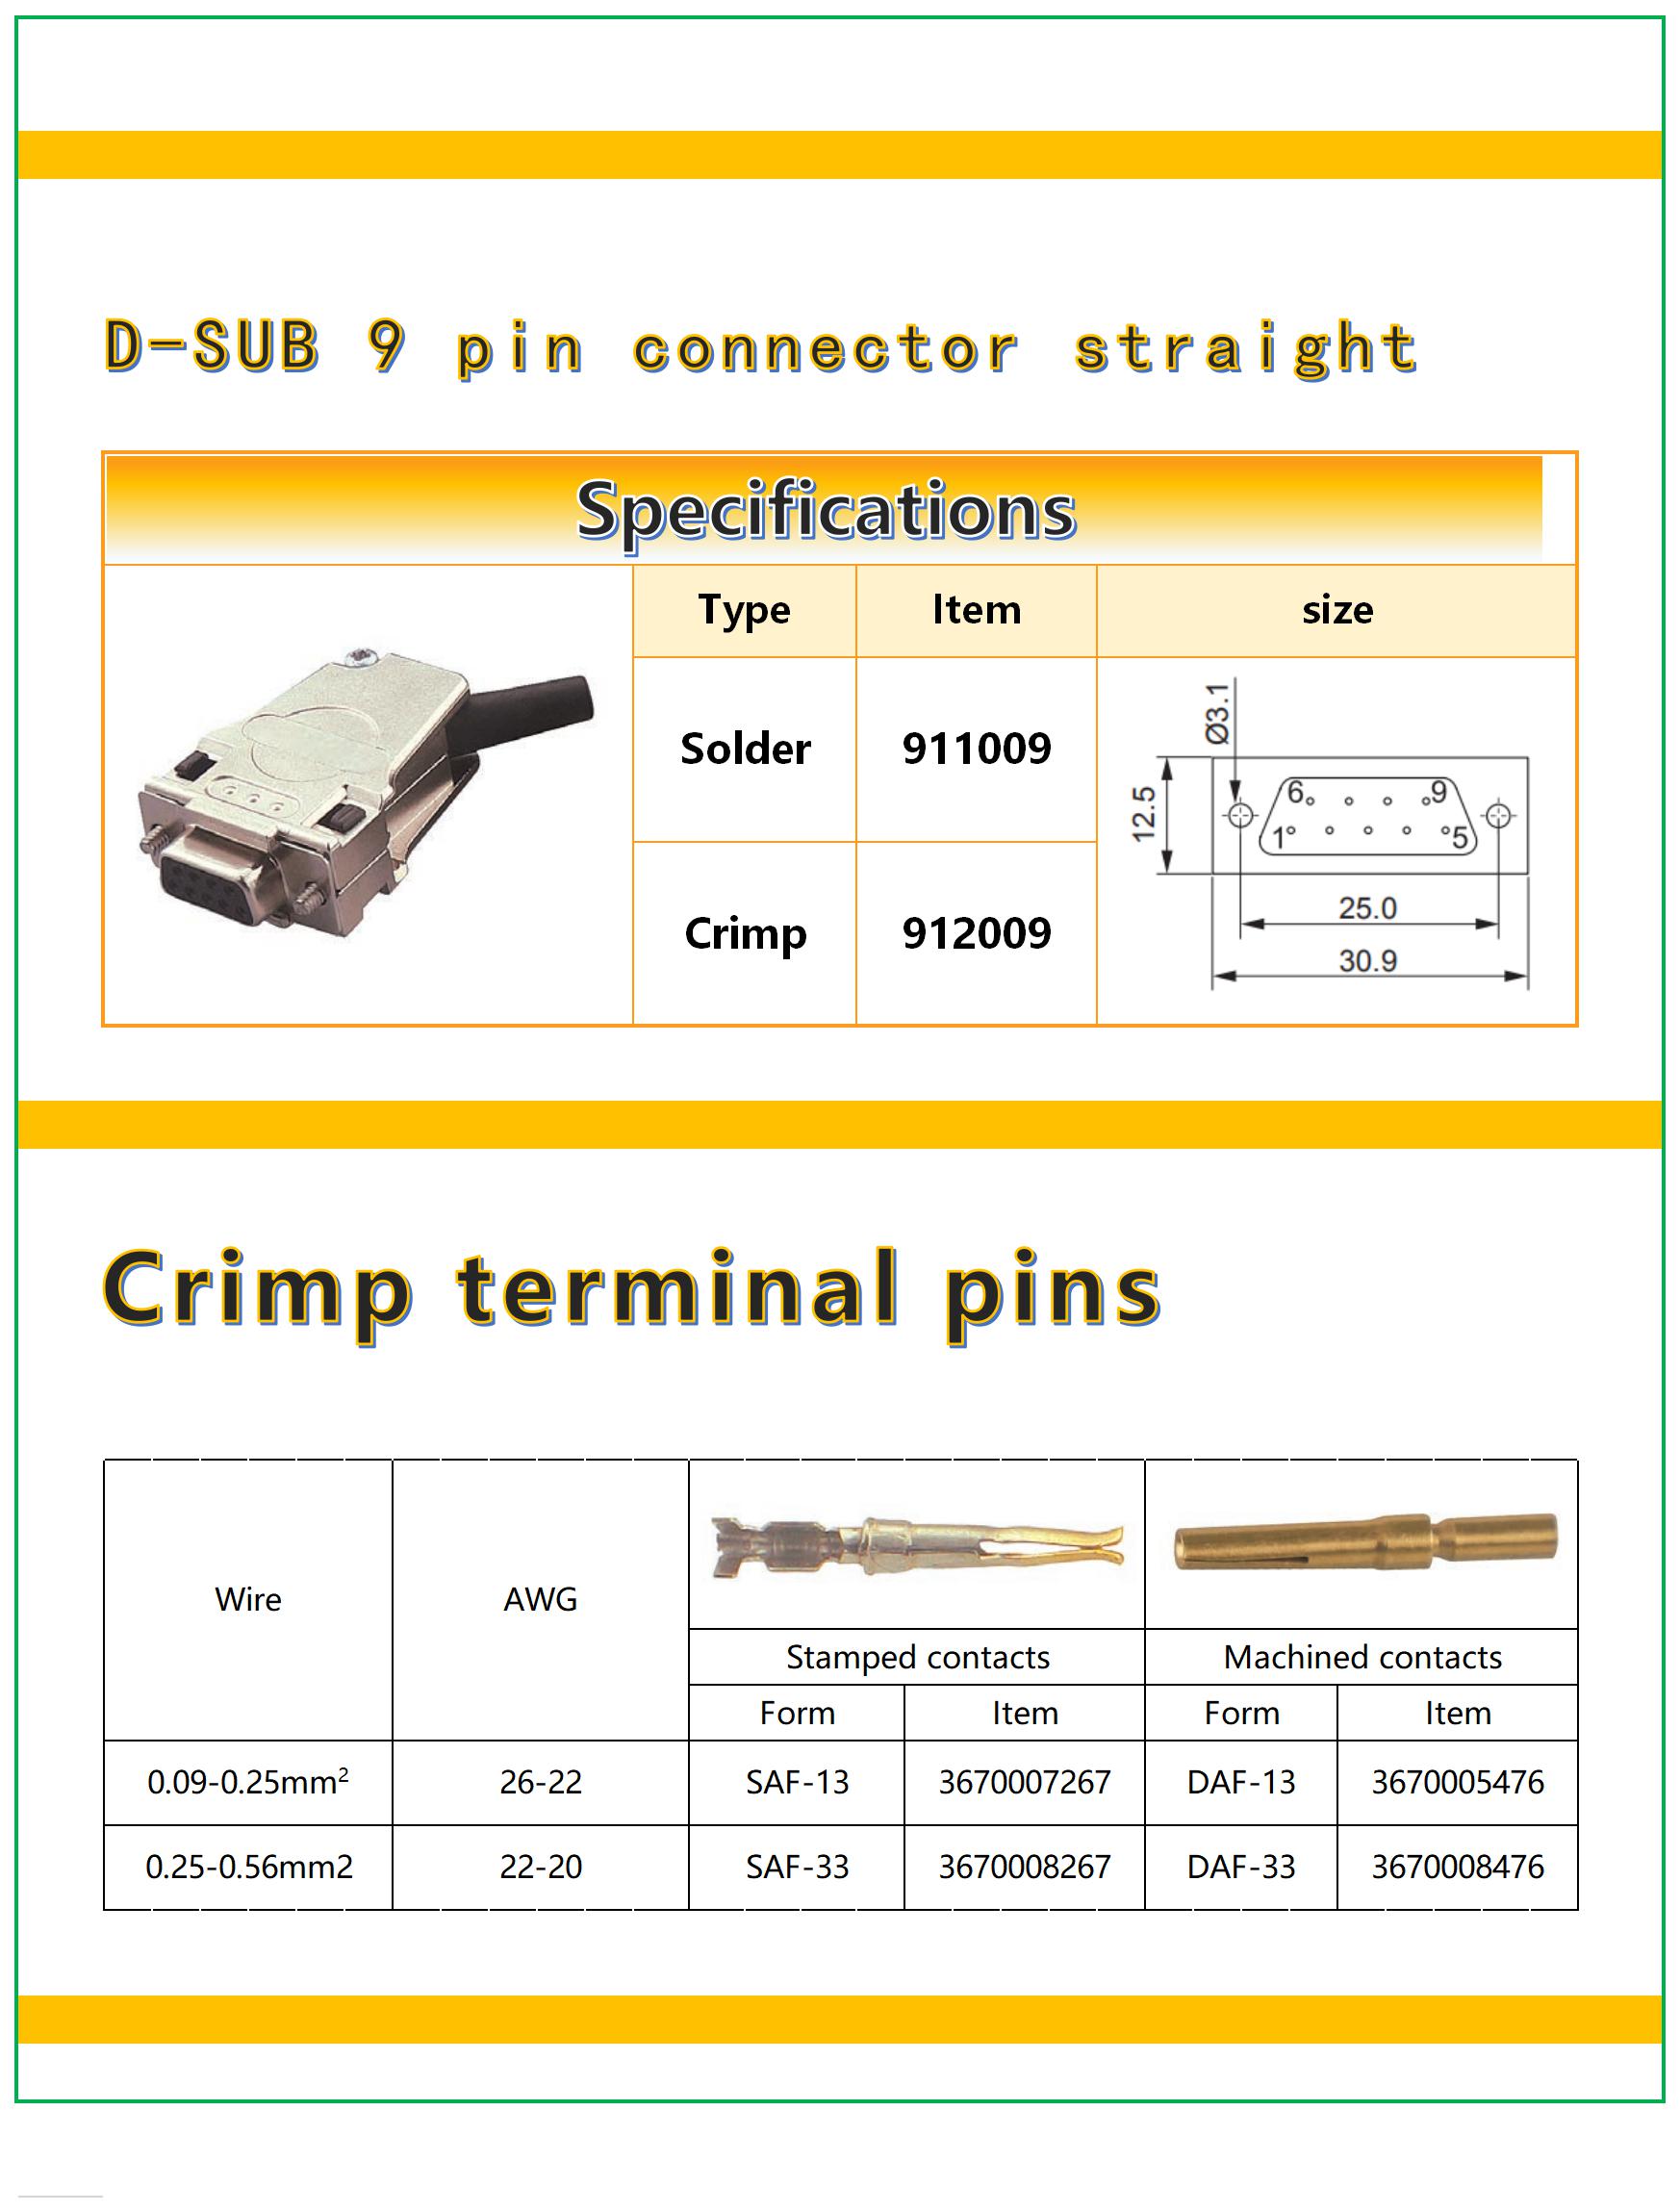 D-SUB 9 pin female connector